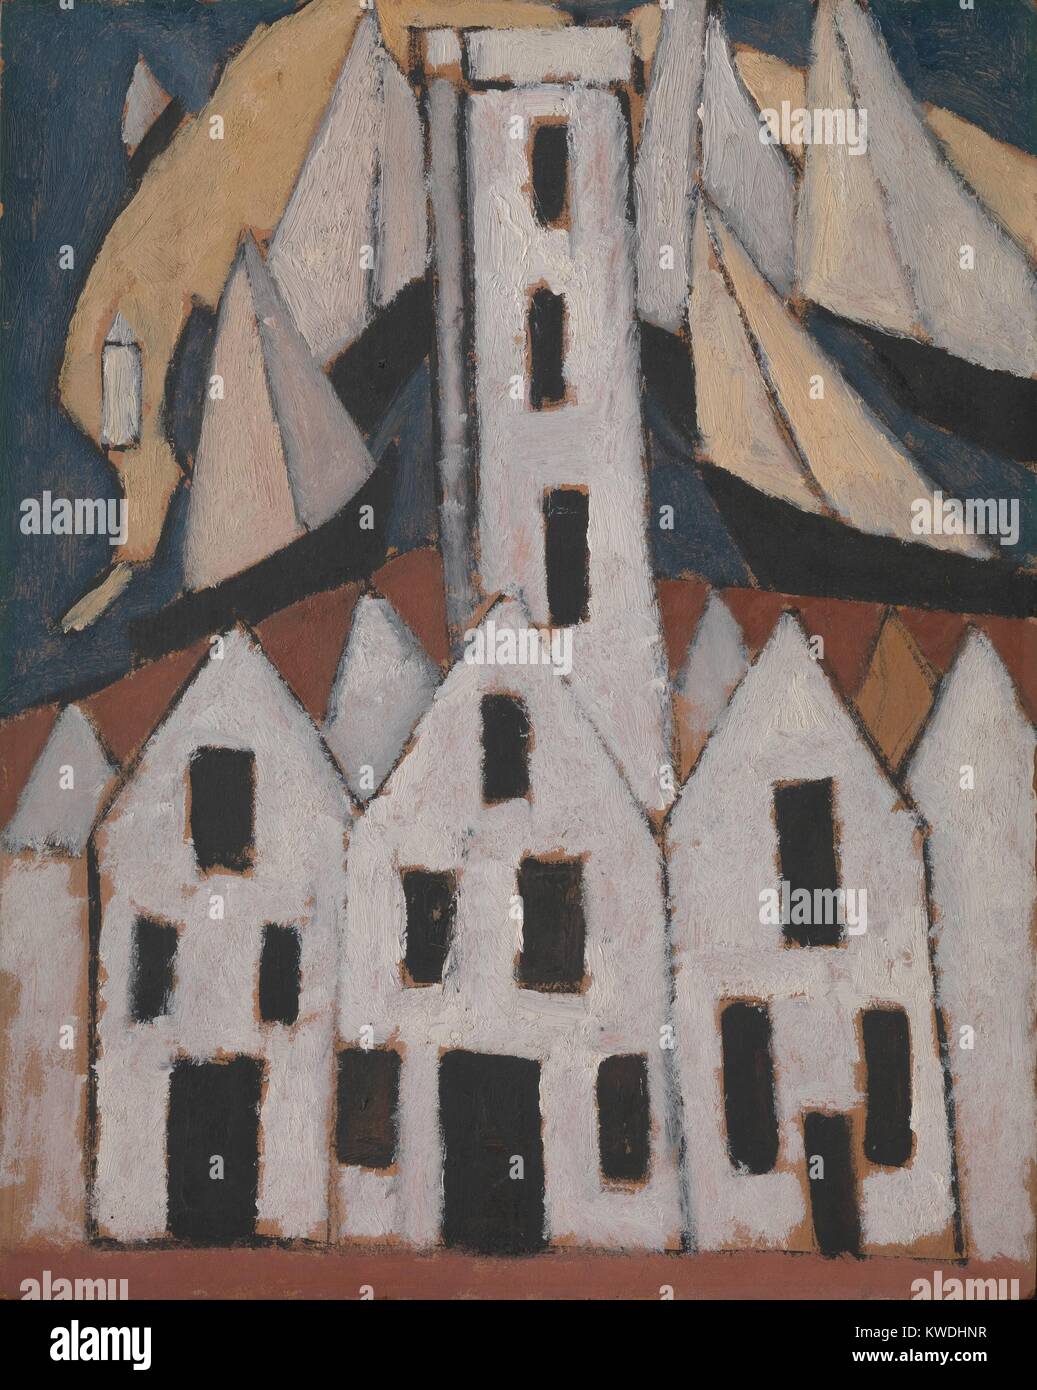 MOVEMENT NO. 5, PROVINCETOWN HOUSES, by Marsden Hartley, 1916, American oil painting. Hartley painted several houses, sailboats, and the tall Pilgrim Monument in flat, geometric forms (BSLOC 2017 7 104) Stock Photo